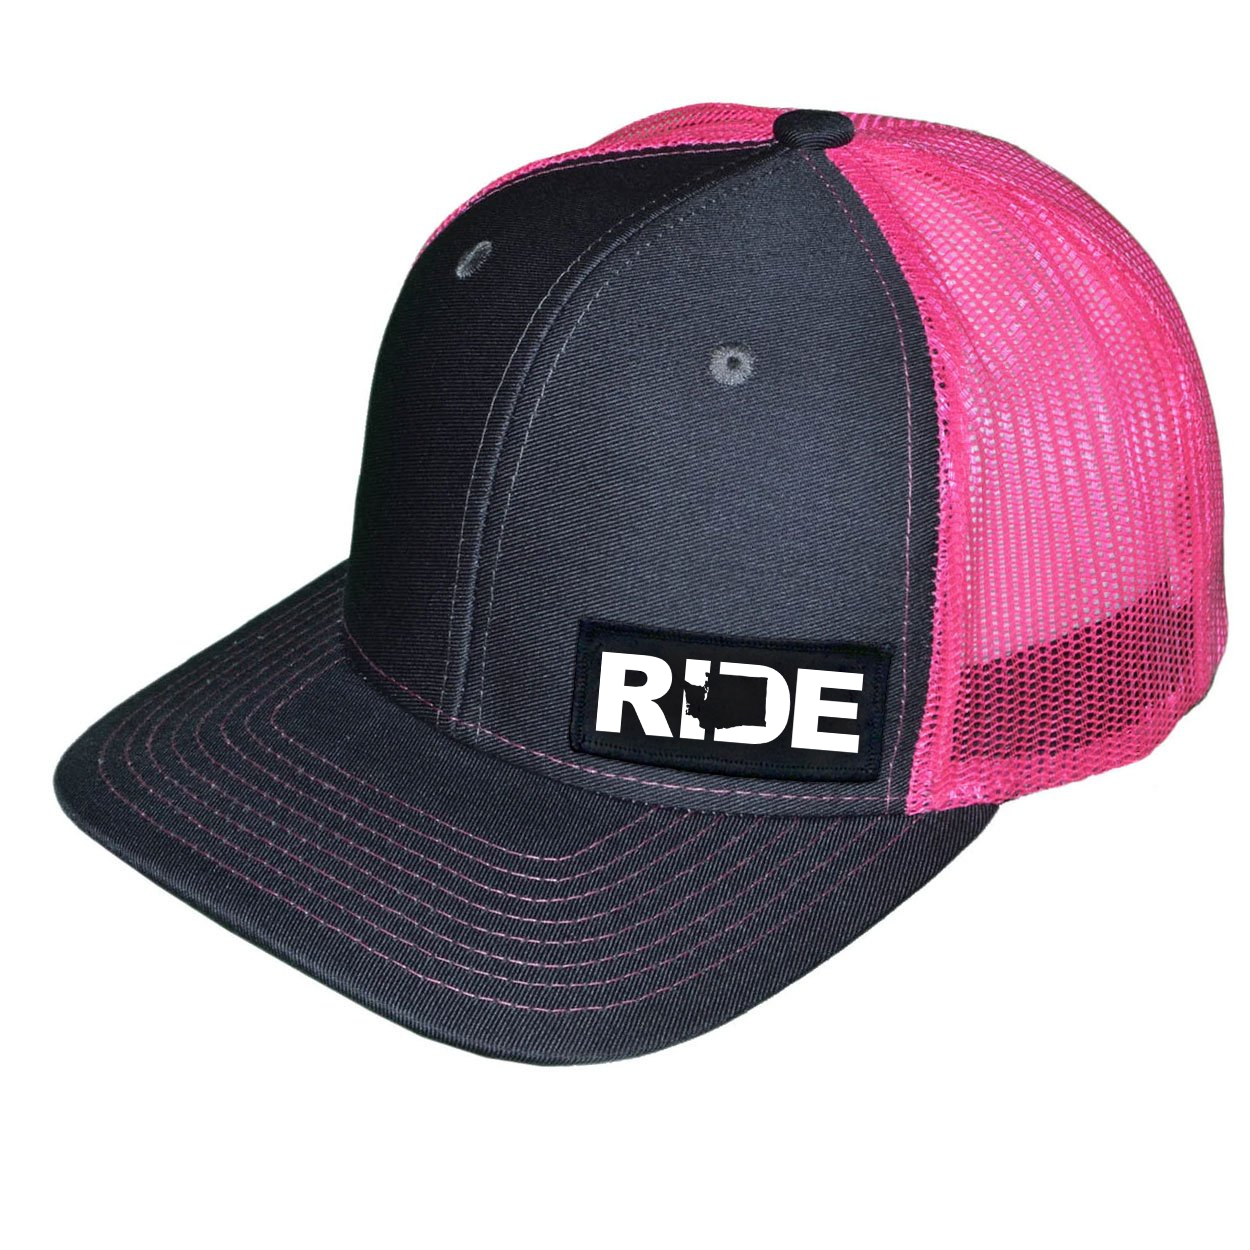 Ride Washington Night Out Woven Patch Snapback Trucker Hat Charcoal/Neon Pink (White Logo)